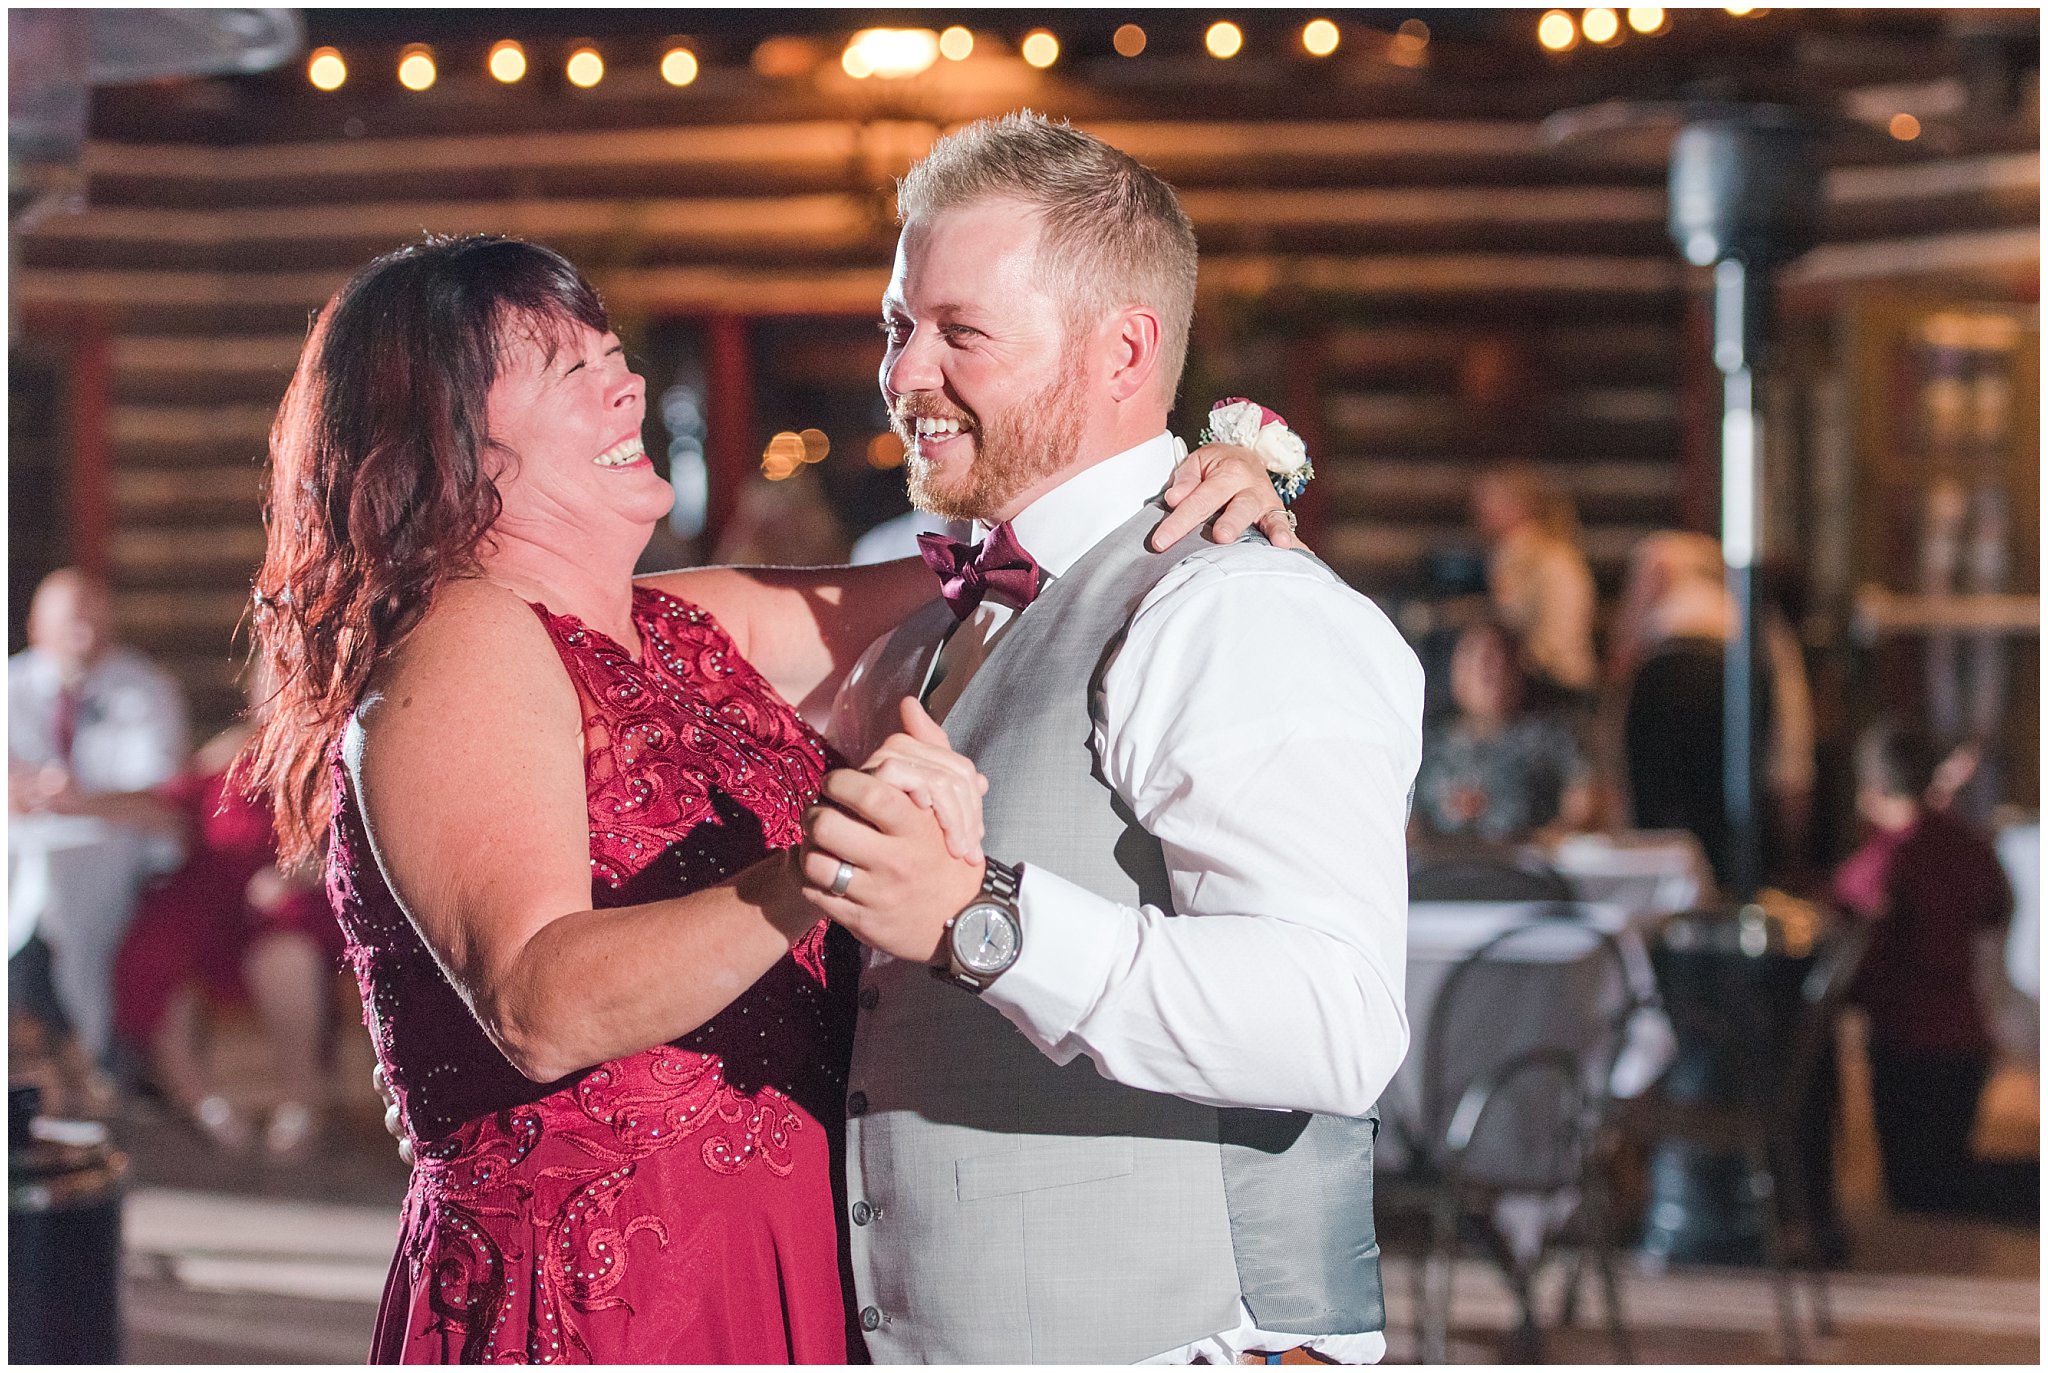 mother son dance and laughter during wedding reception | Log Haven Summer Mountain Wedding | Jessie and Dallin Photography